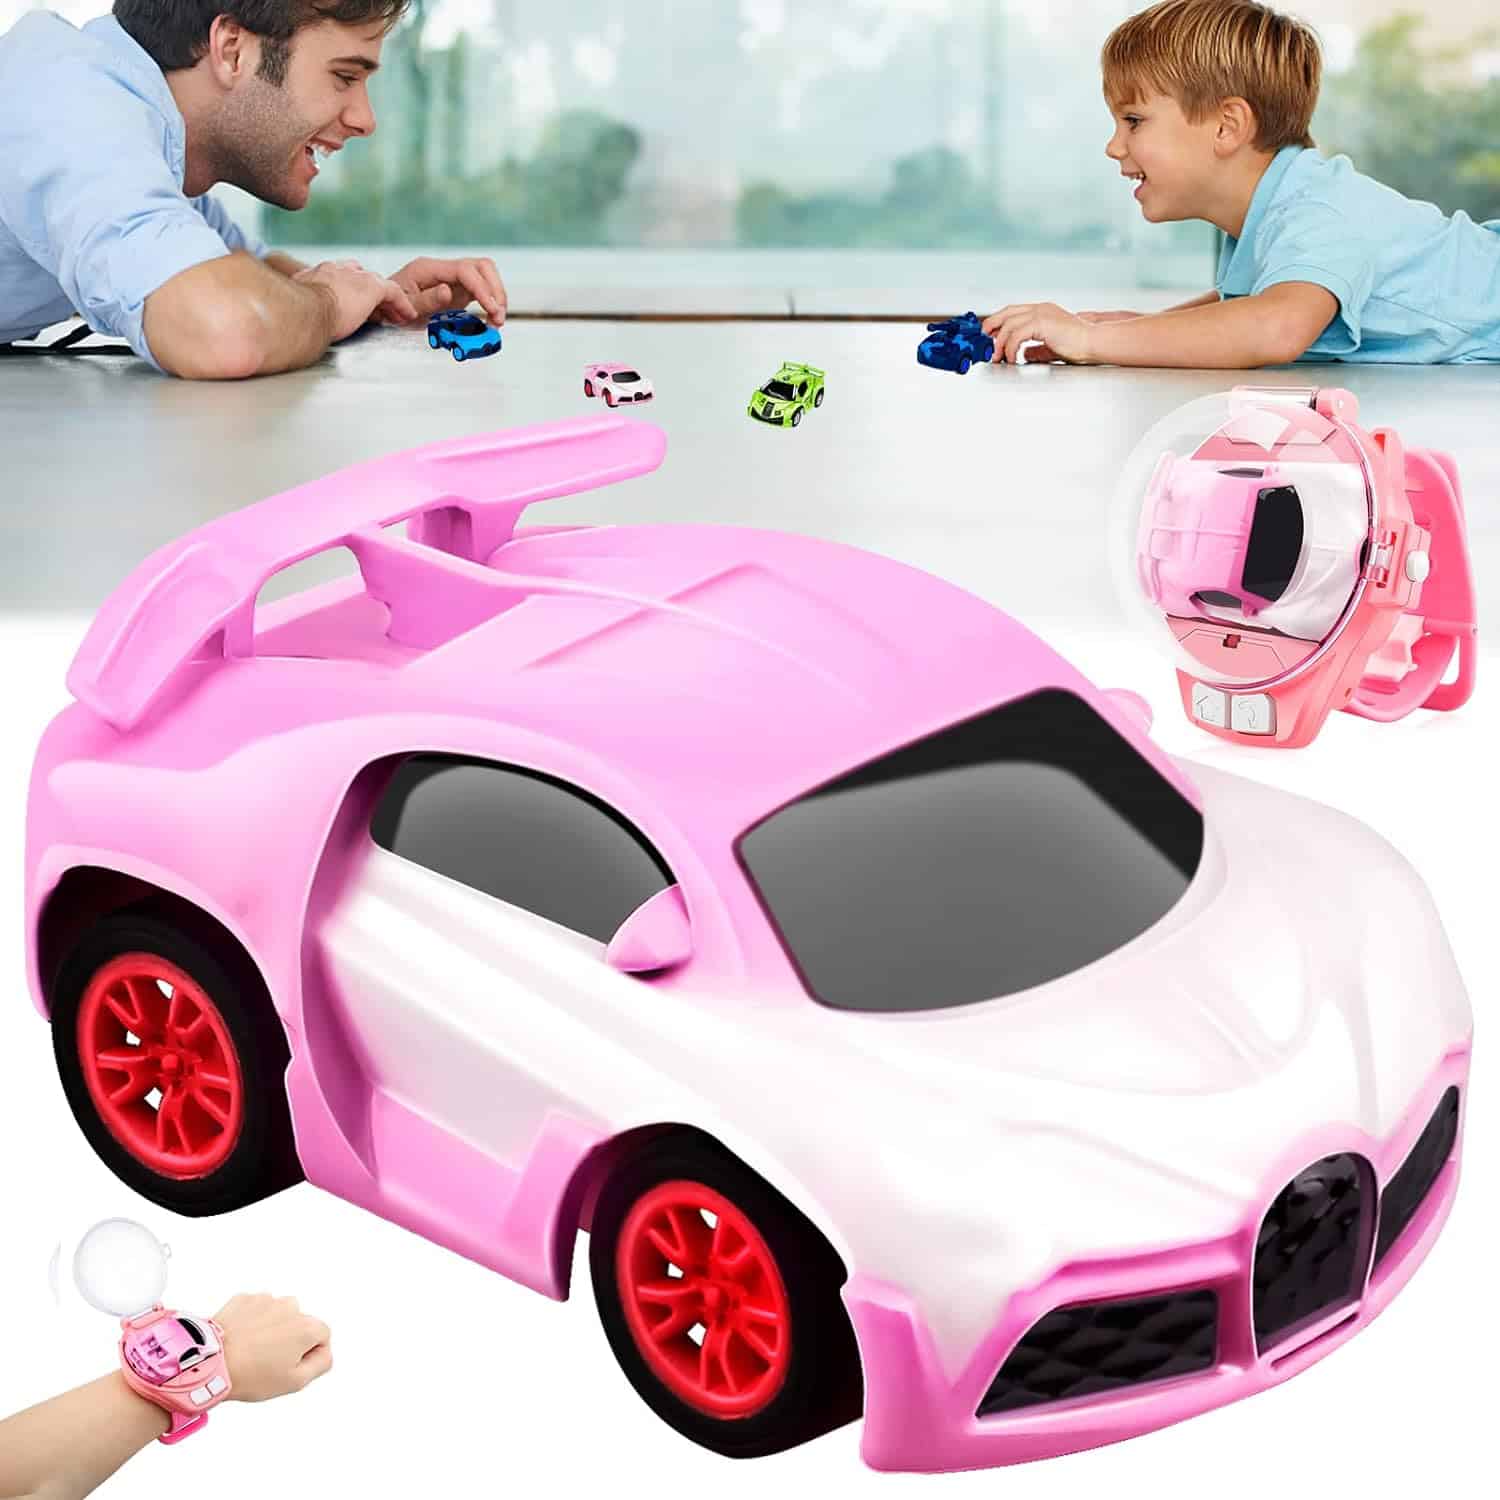 Race Car Toys, Mini Remote Control Car Watch Toys for Toddlers: A Fun and Educational Review